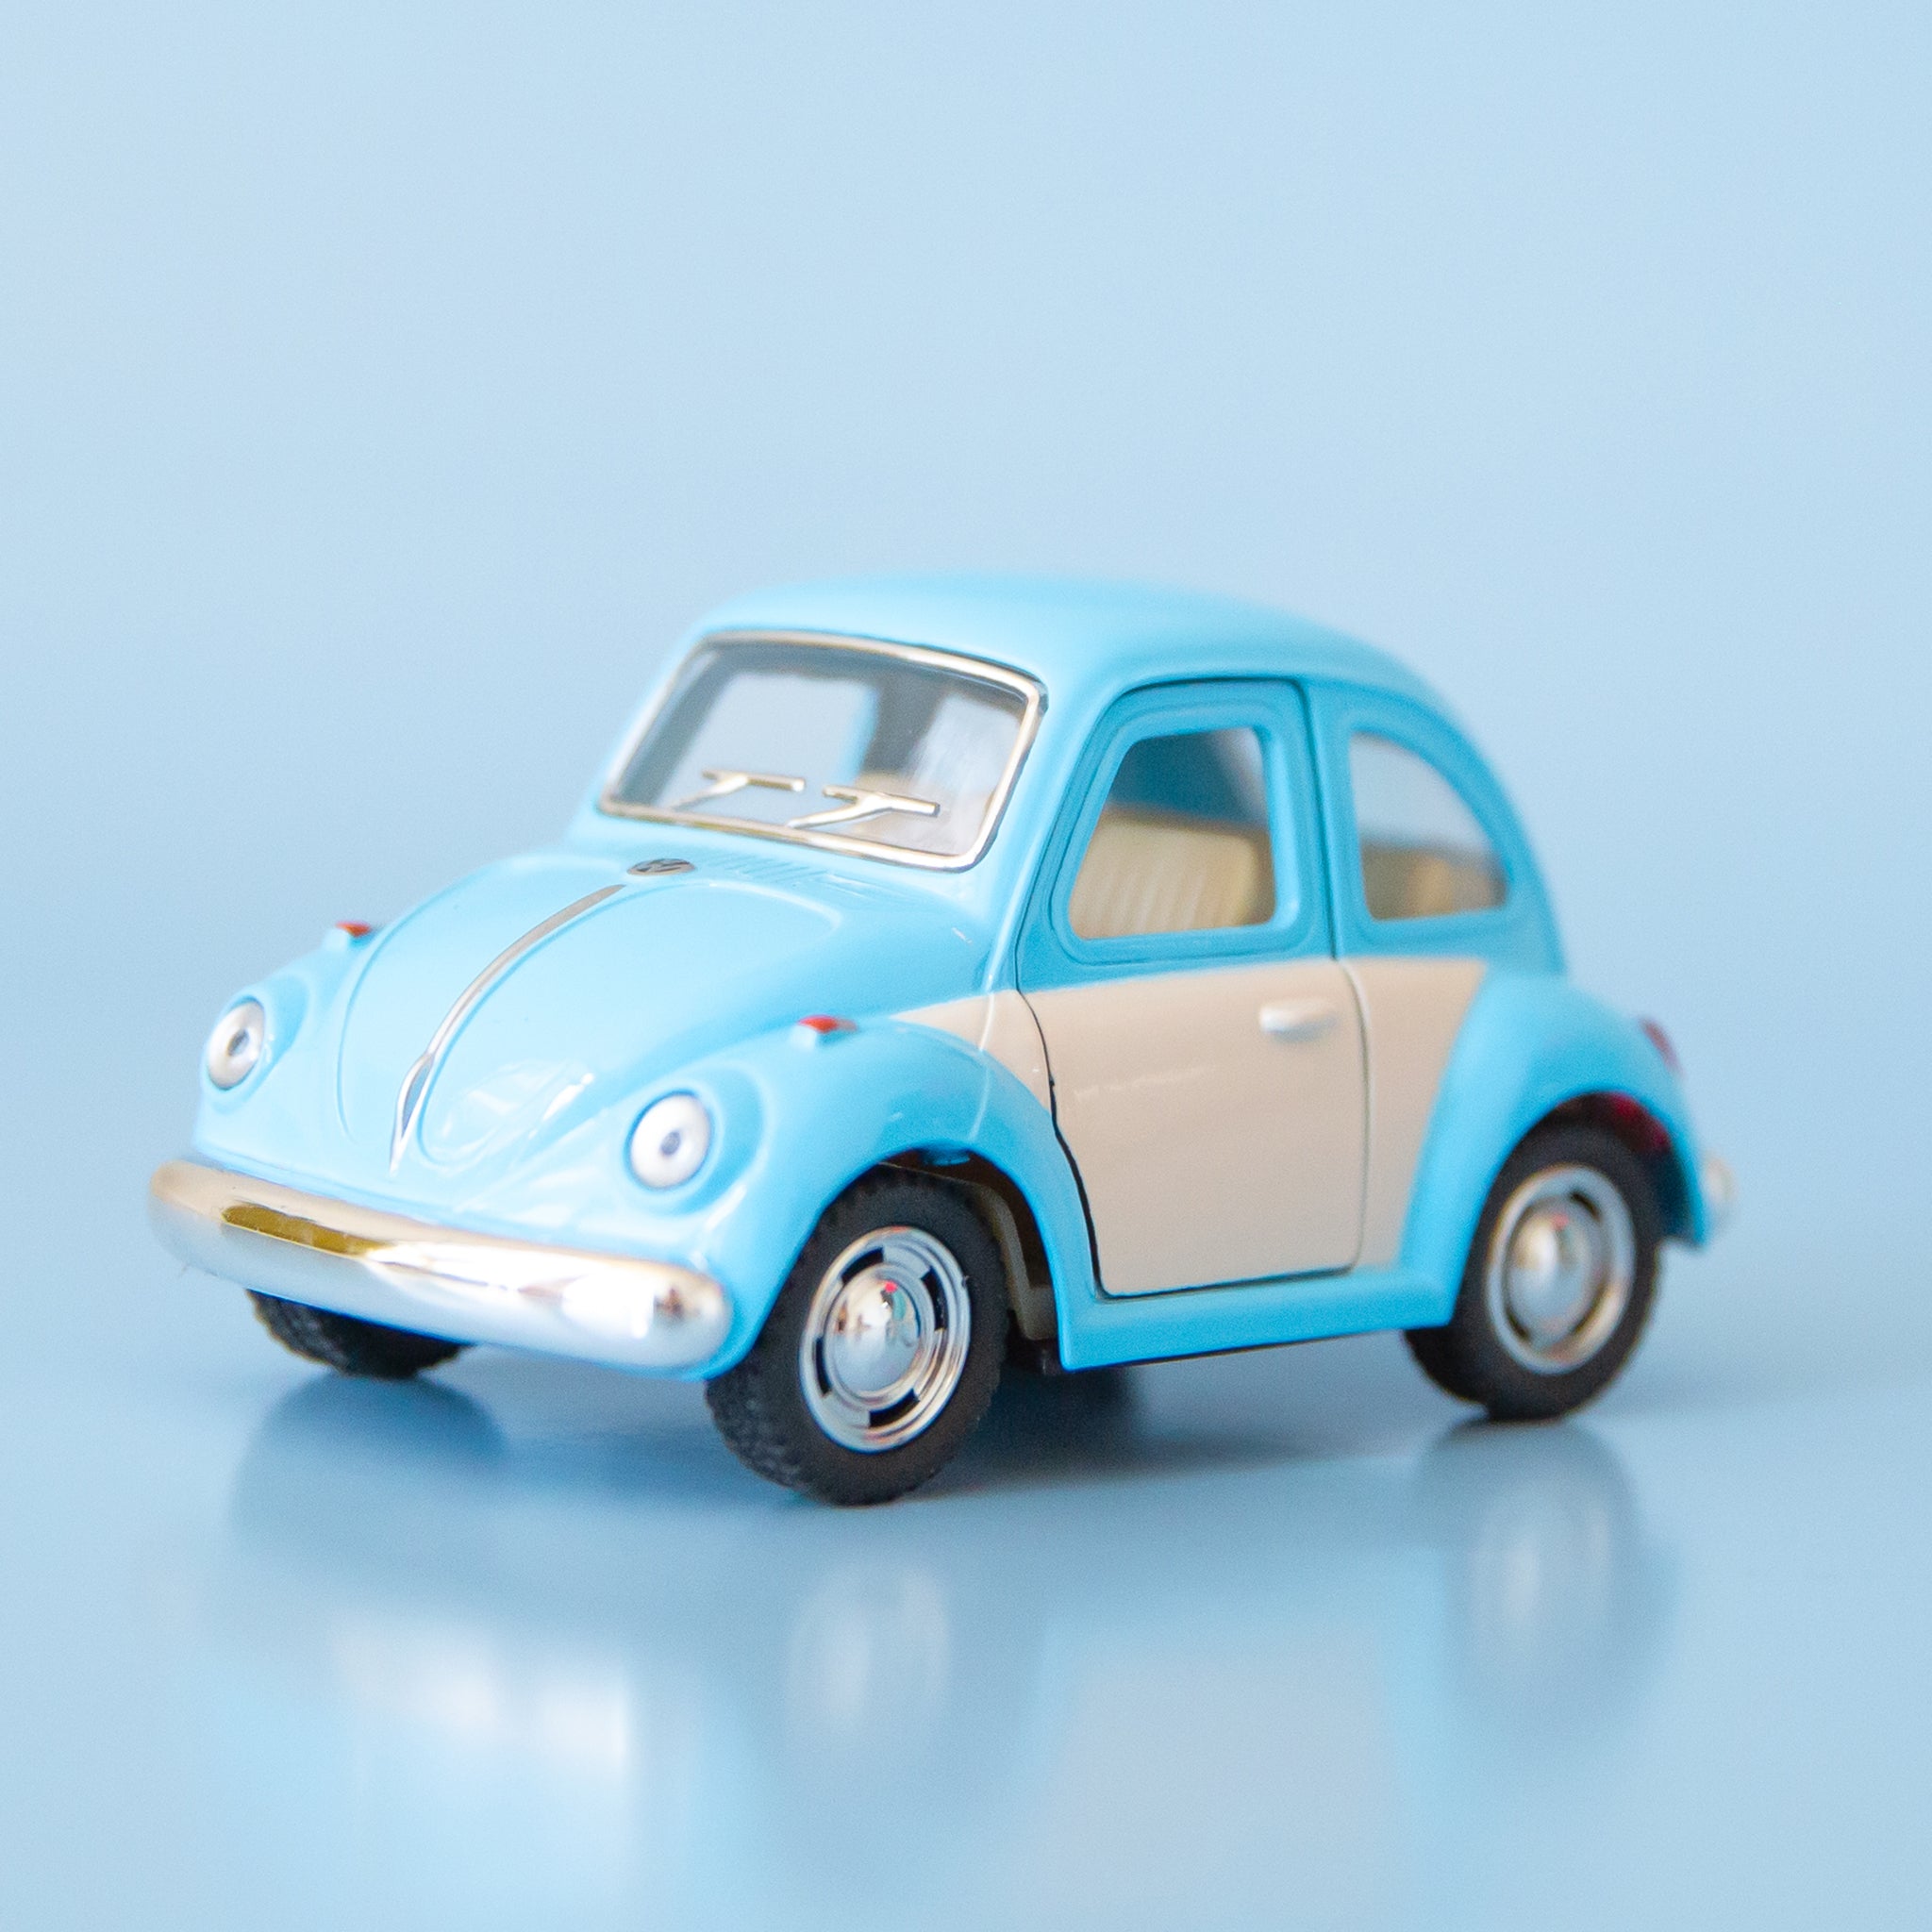 A blue and white metal toy car volkswagen beetle.